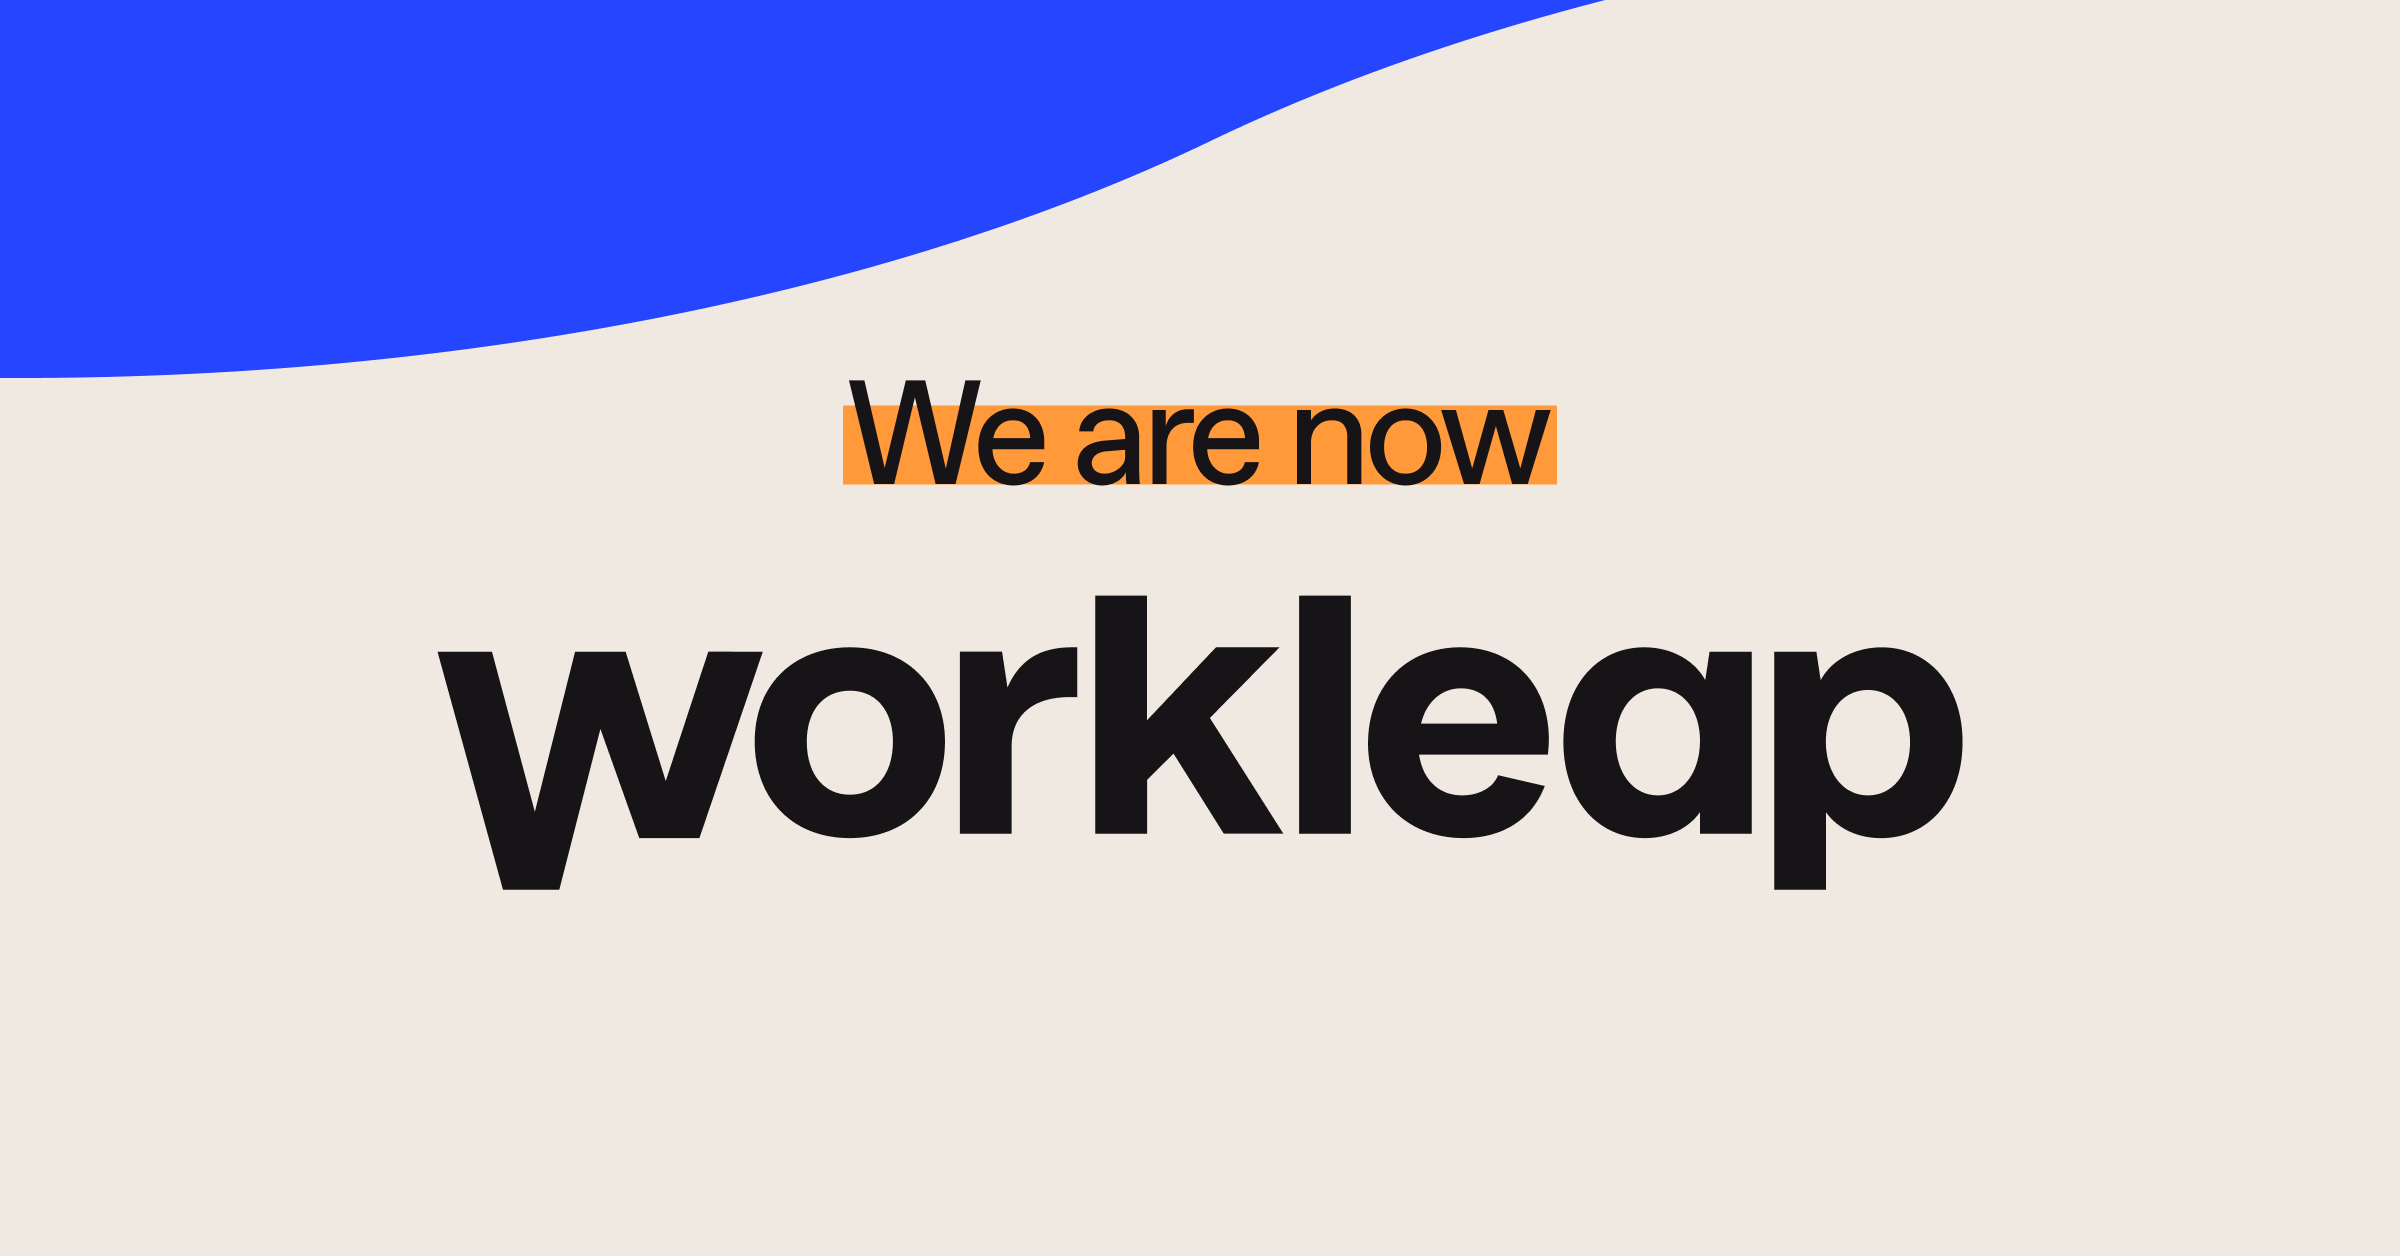 Hi we're Workleap and we're here to make your work experience simpler so that your people can perform at their best.